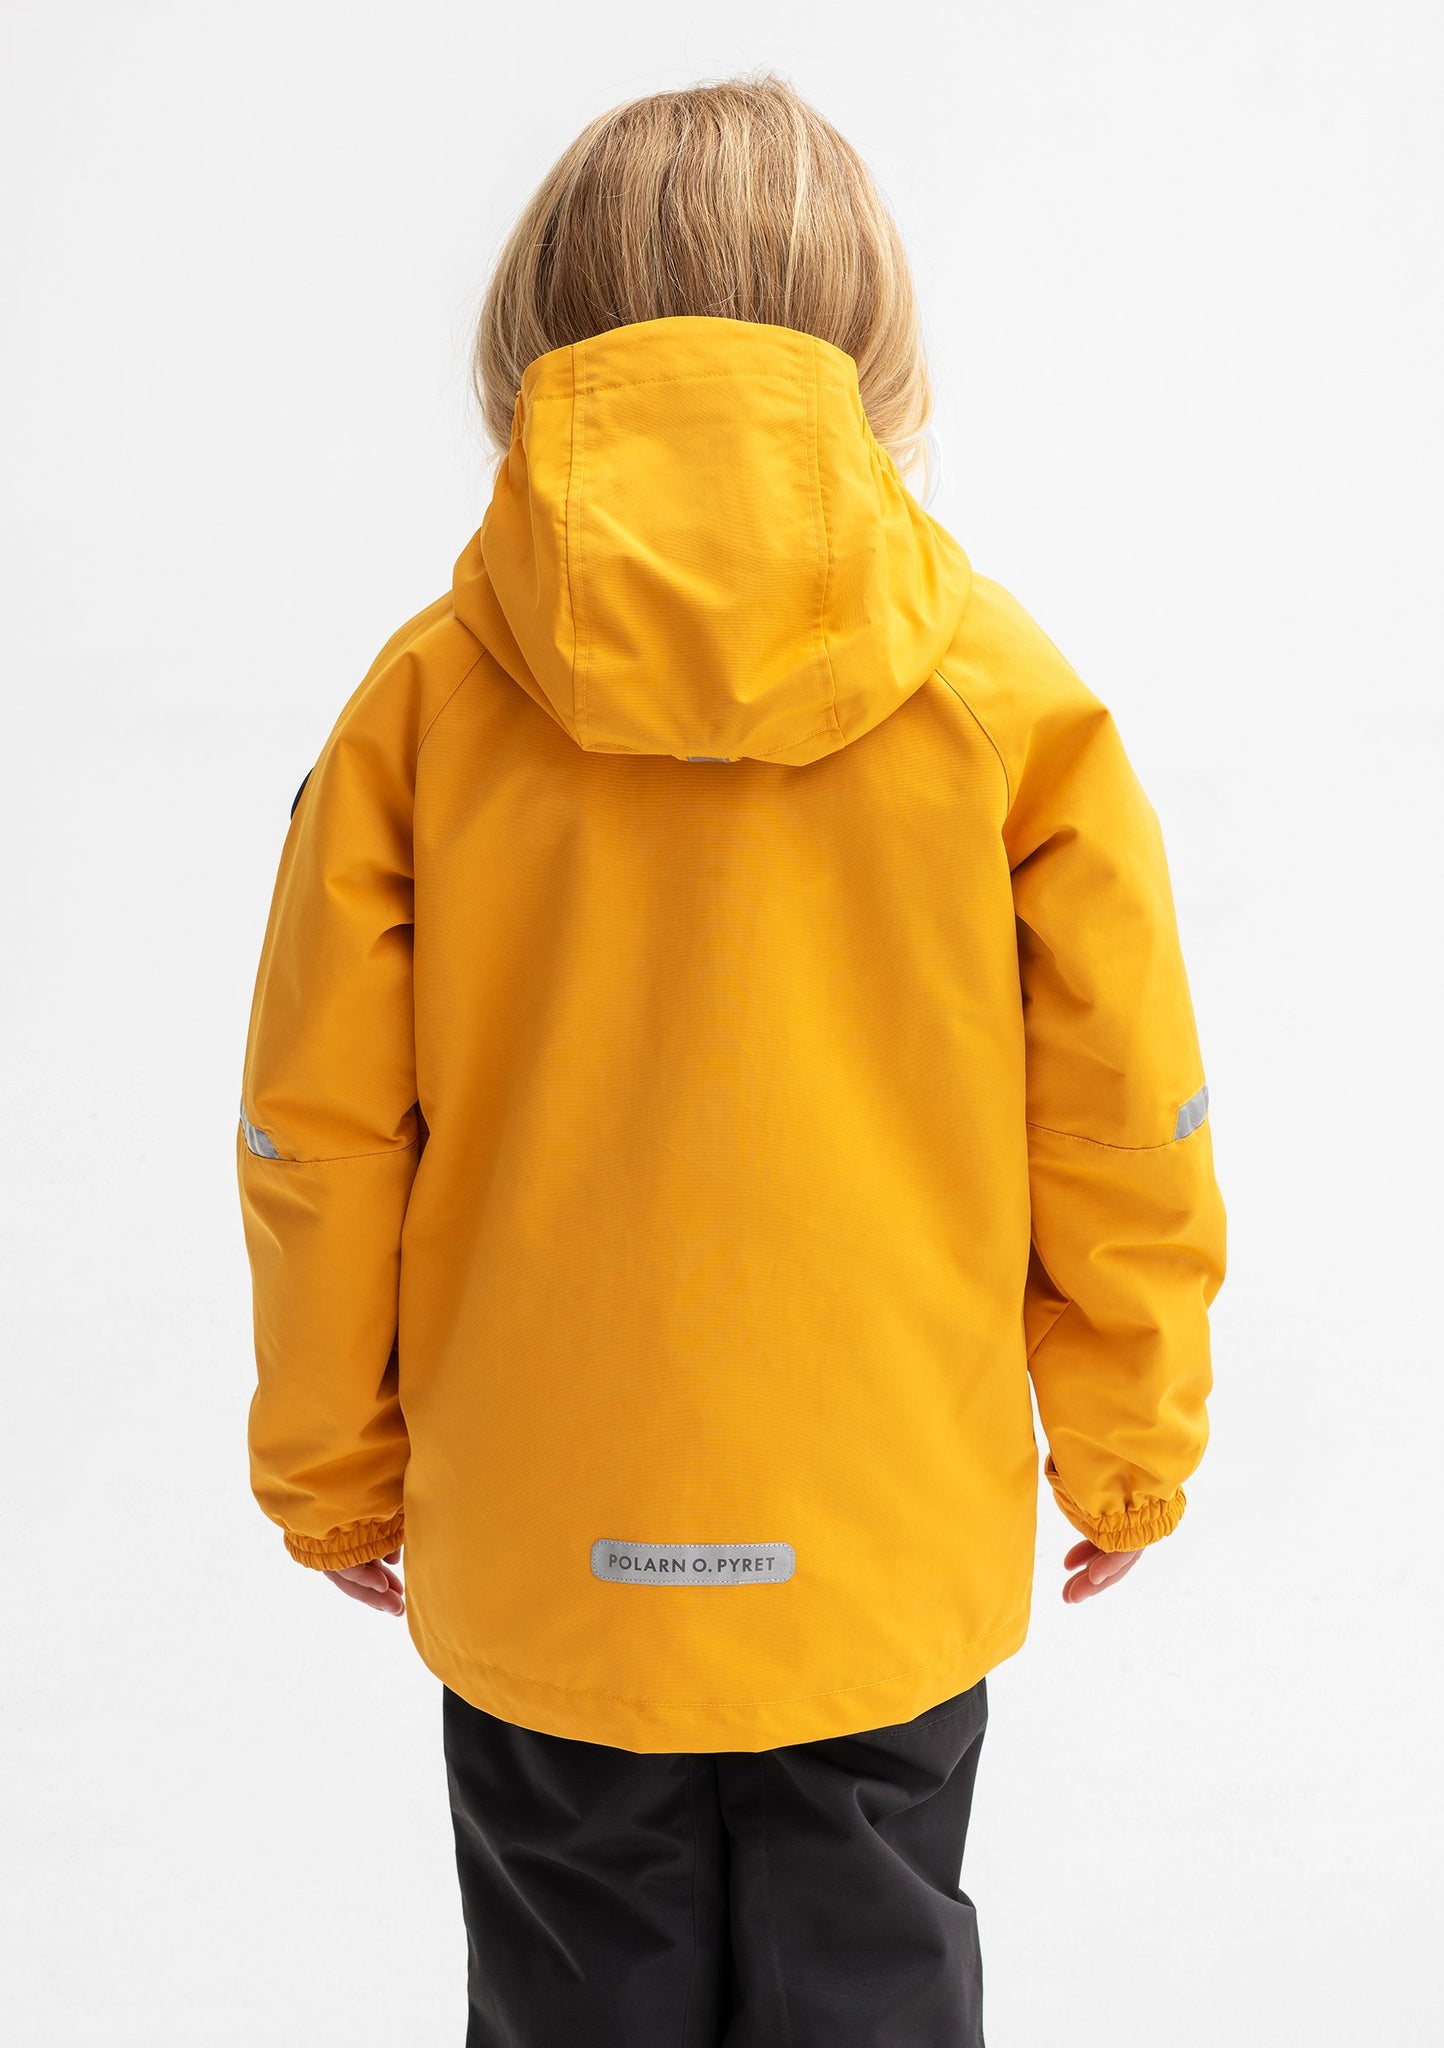 Back view of a young girl wearing a yellow, kids waterproof jacket with detachable hood and reflectors, made of shell fabric.